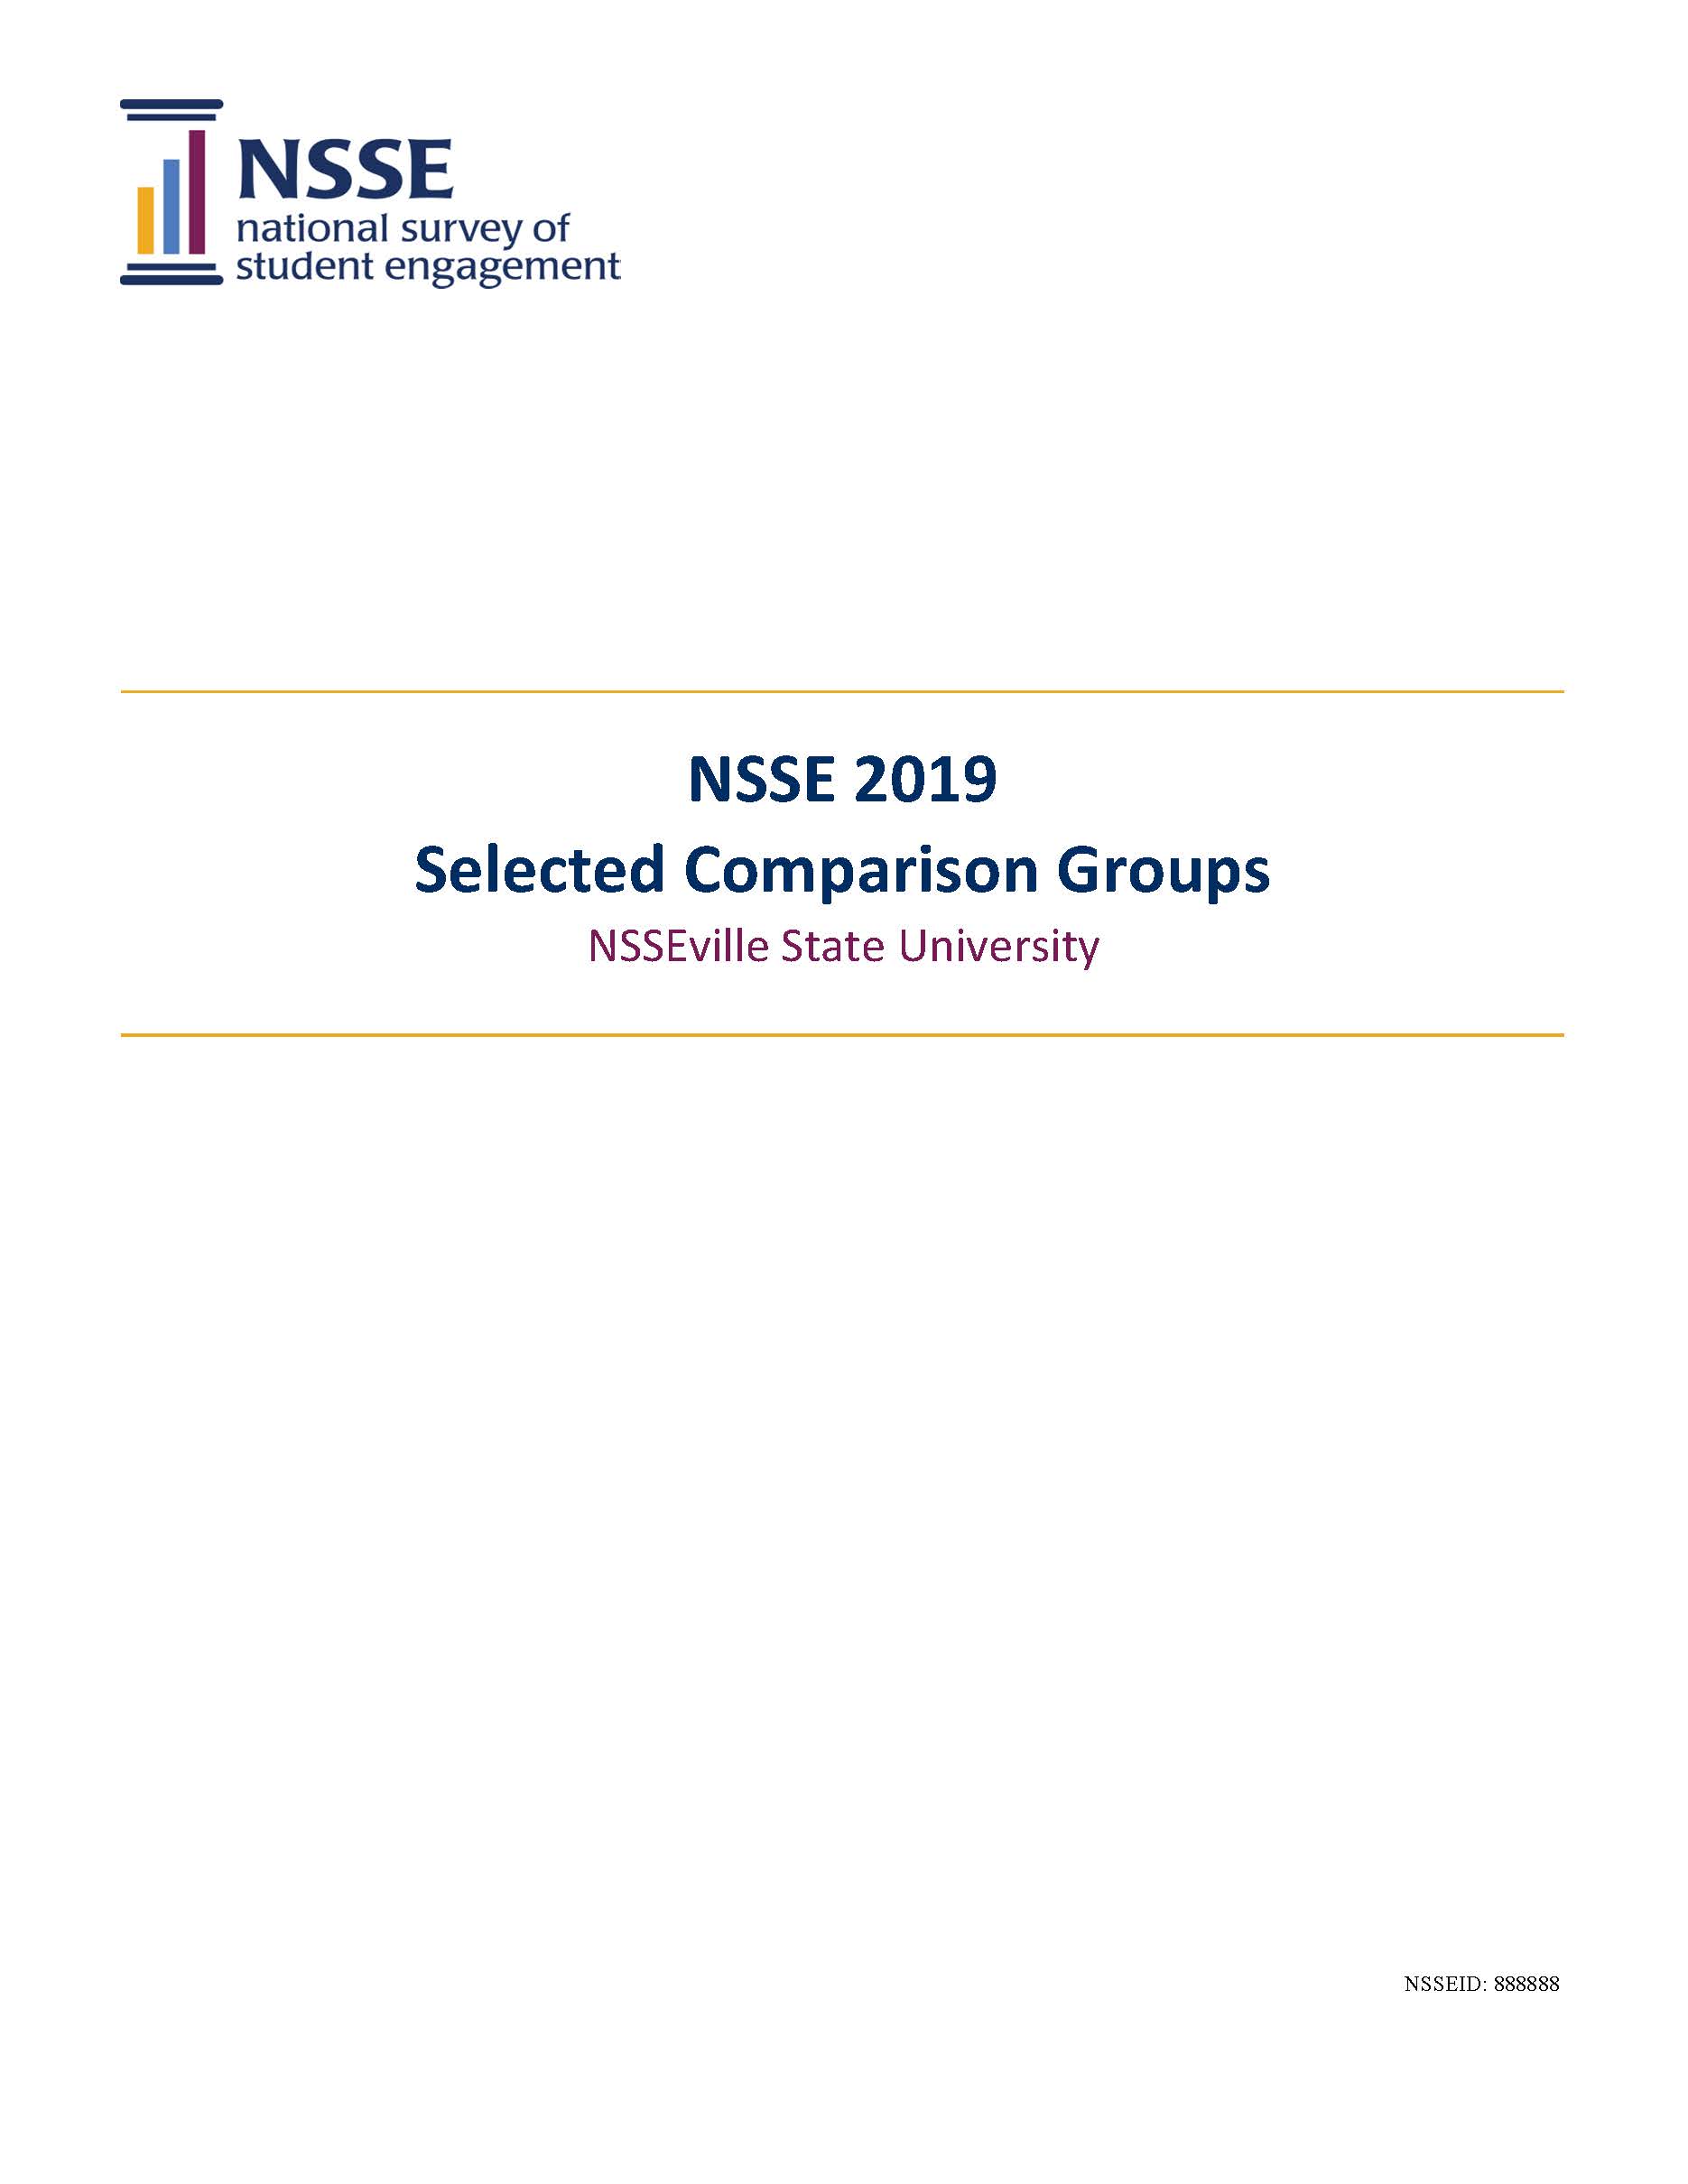 Sample Report: page 1 of NSSE Selected Comparison Groups